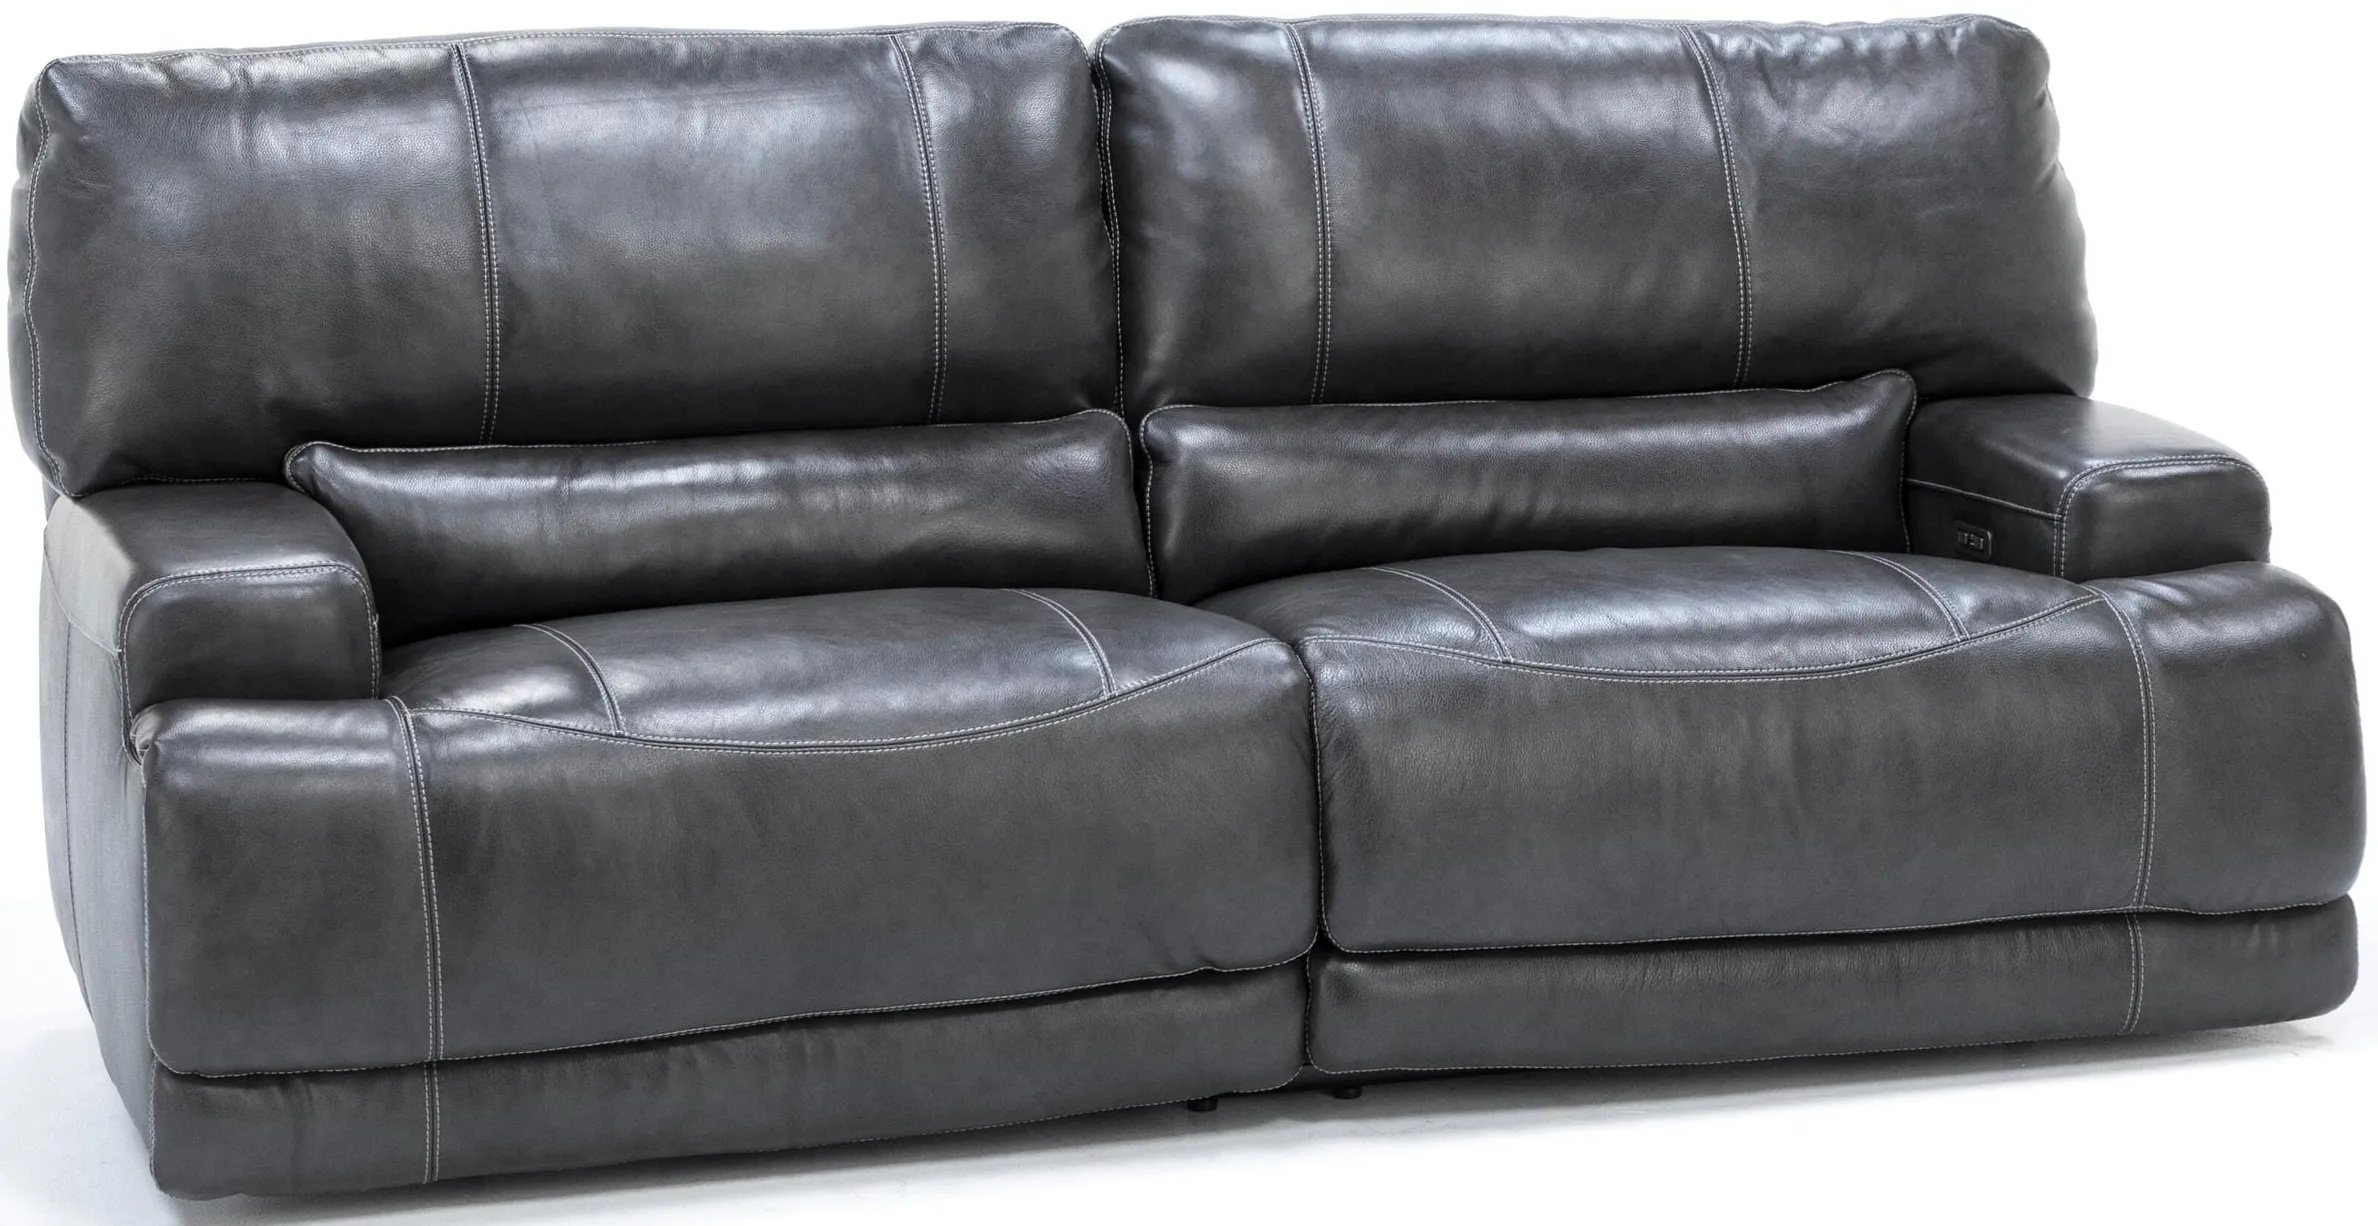 Placier Leather Power Headrest Reclining Sofa in Charcoal